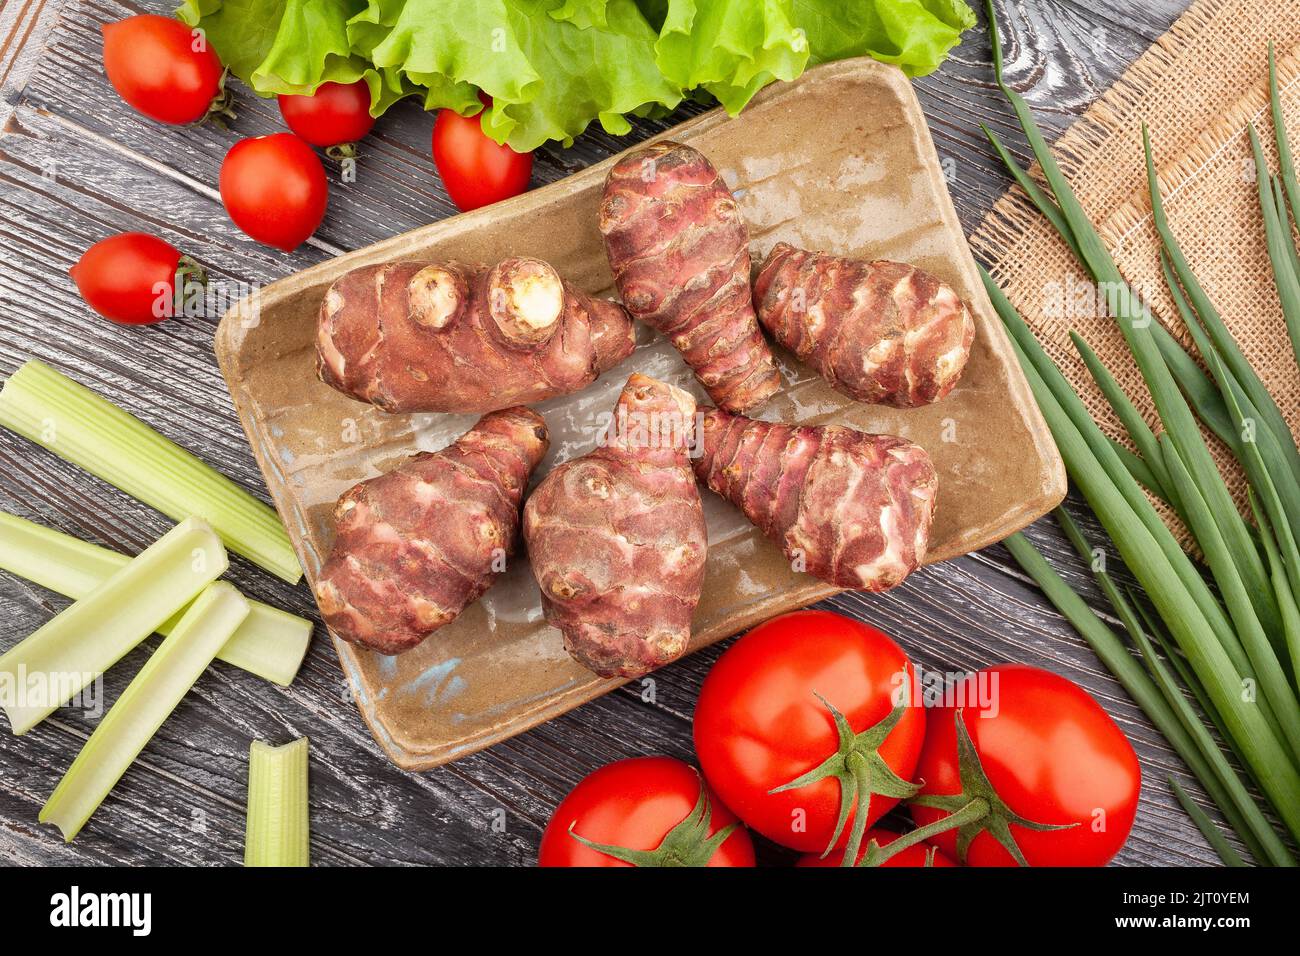 topinambur on a plate on wood background Stock Photo